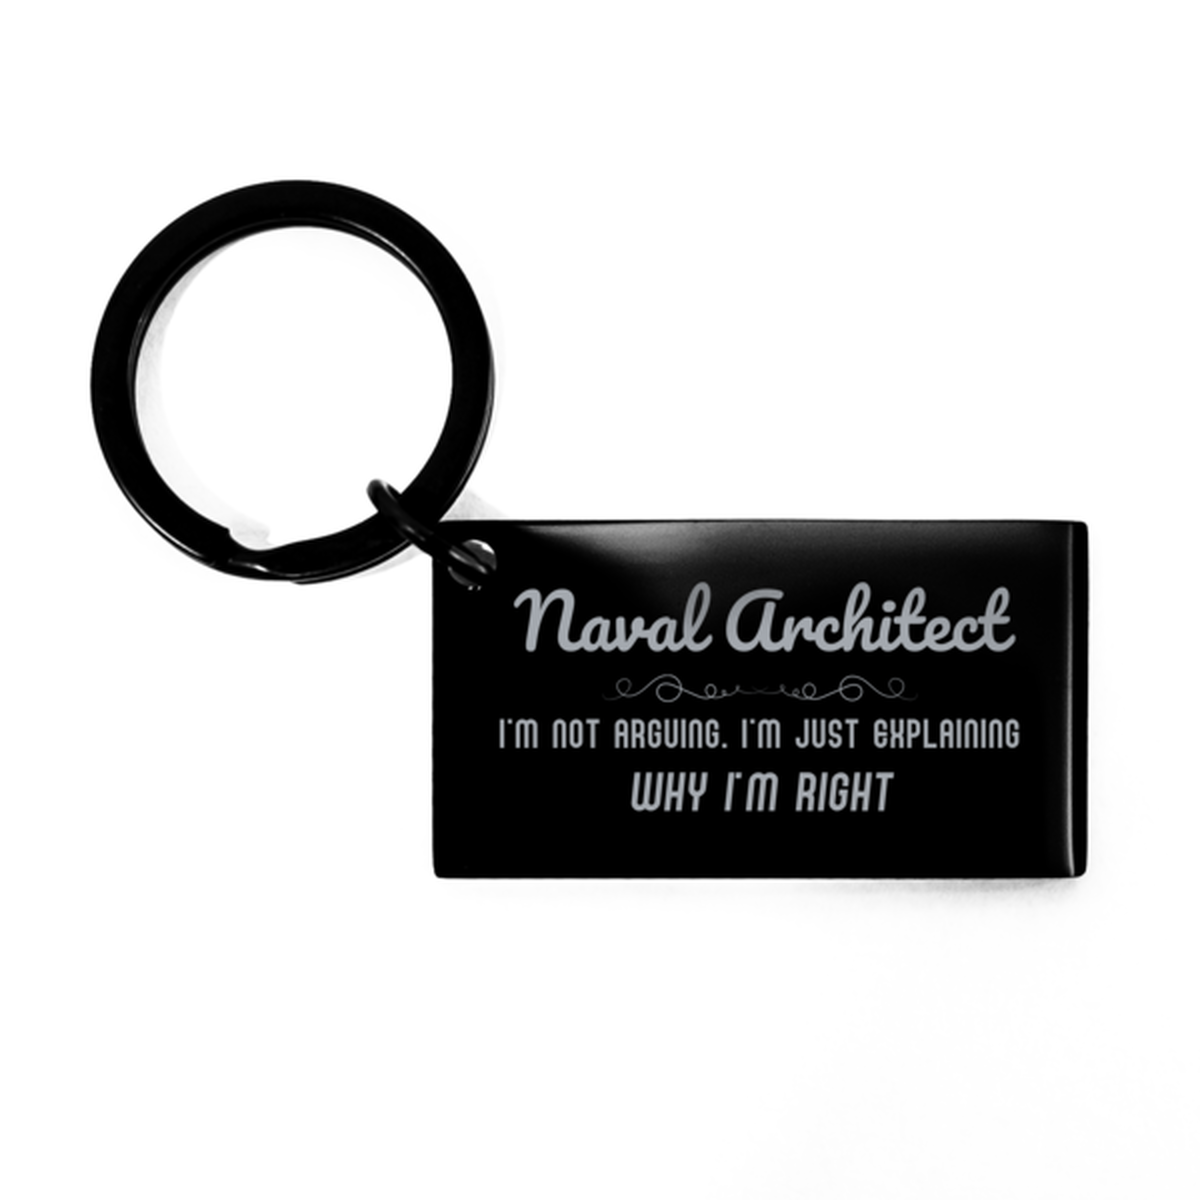 Naval Architect I'm not Arguing. I'm Just Explaining Why I'm RIGHT Keychain, Funny Saying Quote Naval Architect Gifts For Naval Architect Graduation Birthday Christmas Gifts for Men Women Coworker